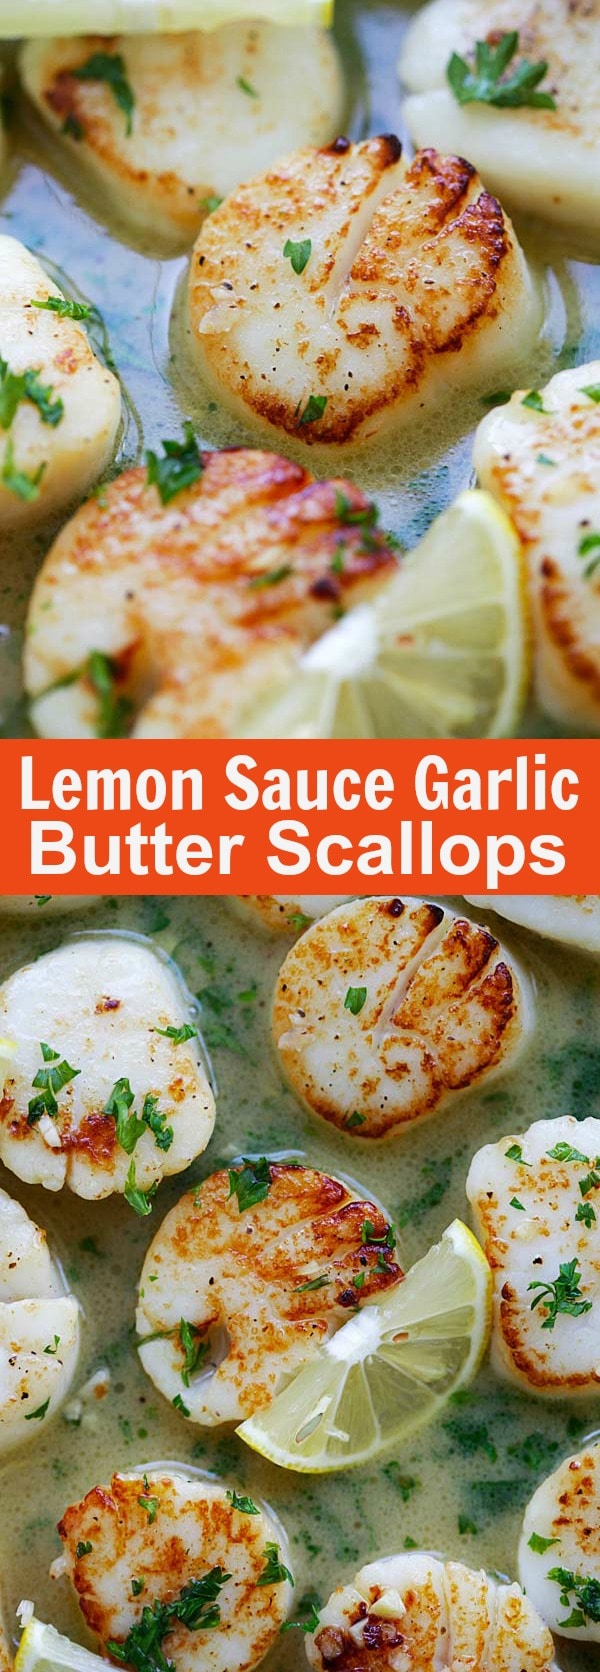 Garlic Butter Scallops with Lemon Sauce - better than restaurant's pan-seared scallops with buttery lemon sauce, cheaper and so delicious | rasamalaysia.com